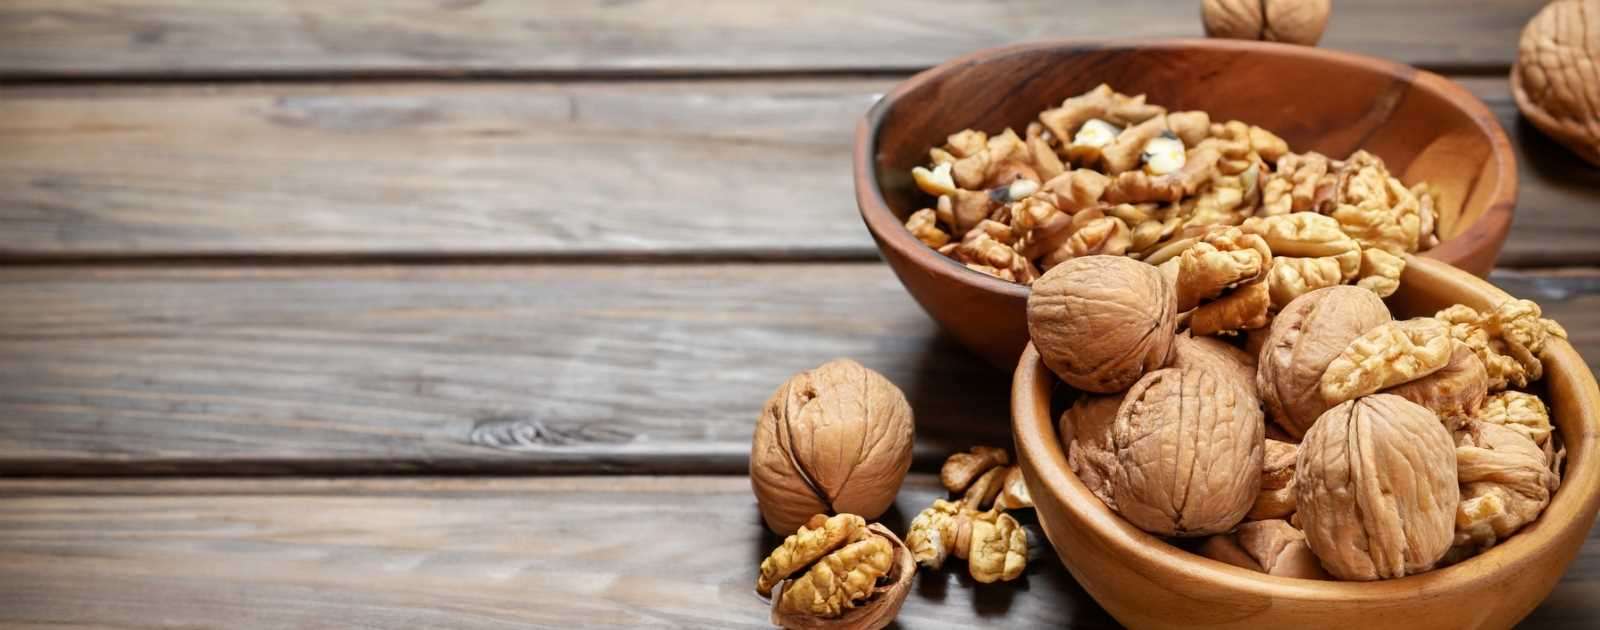 6 Benefits of Walnuts Sexually